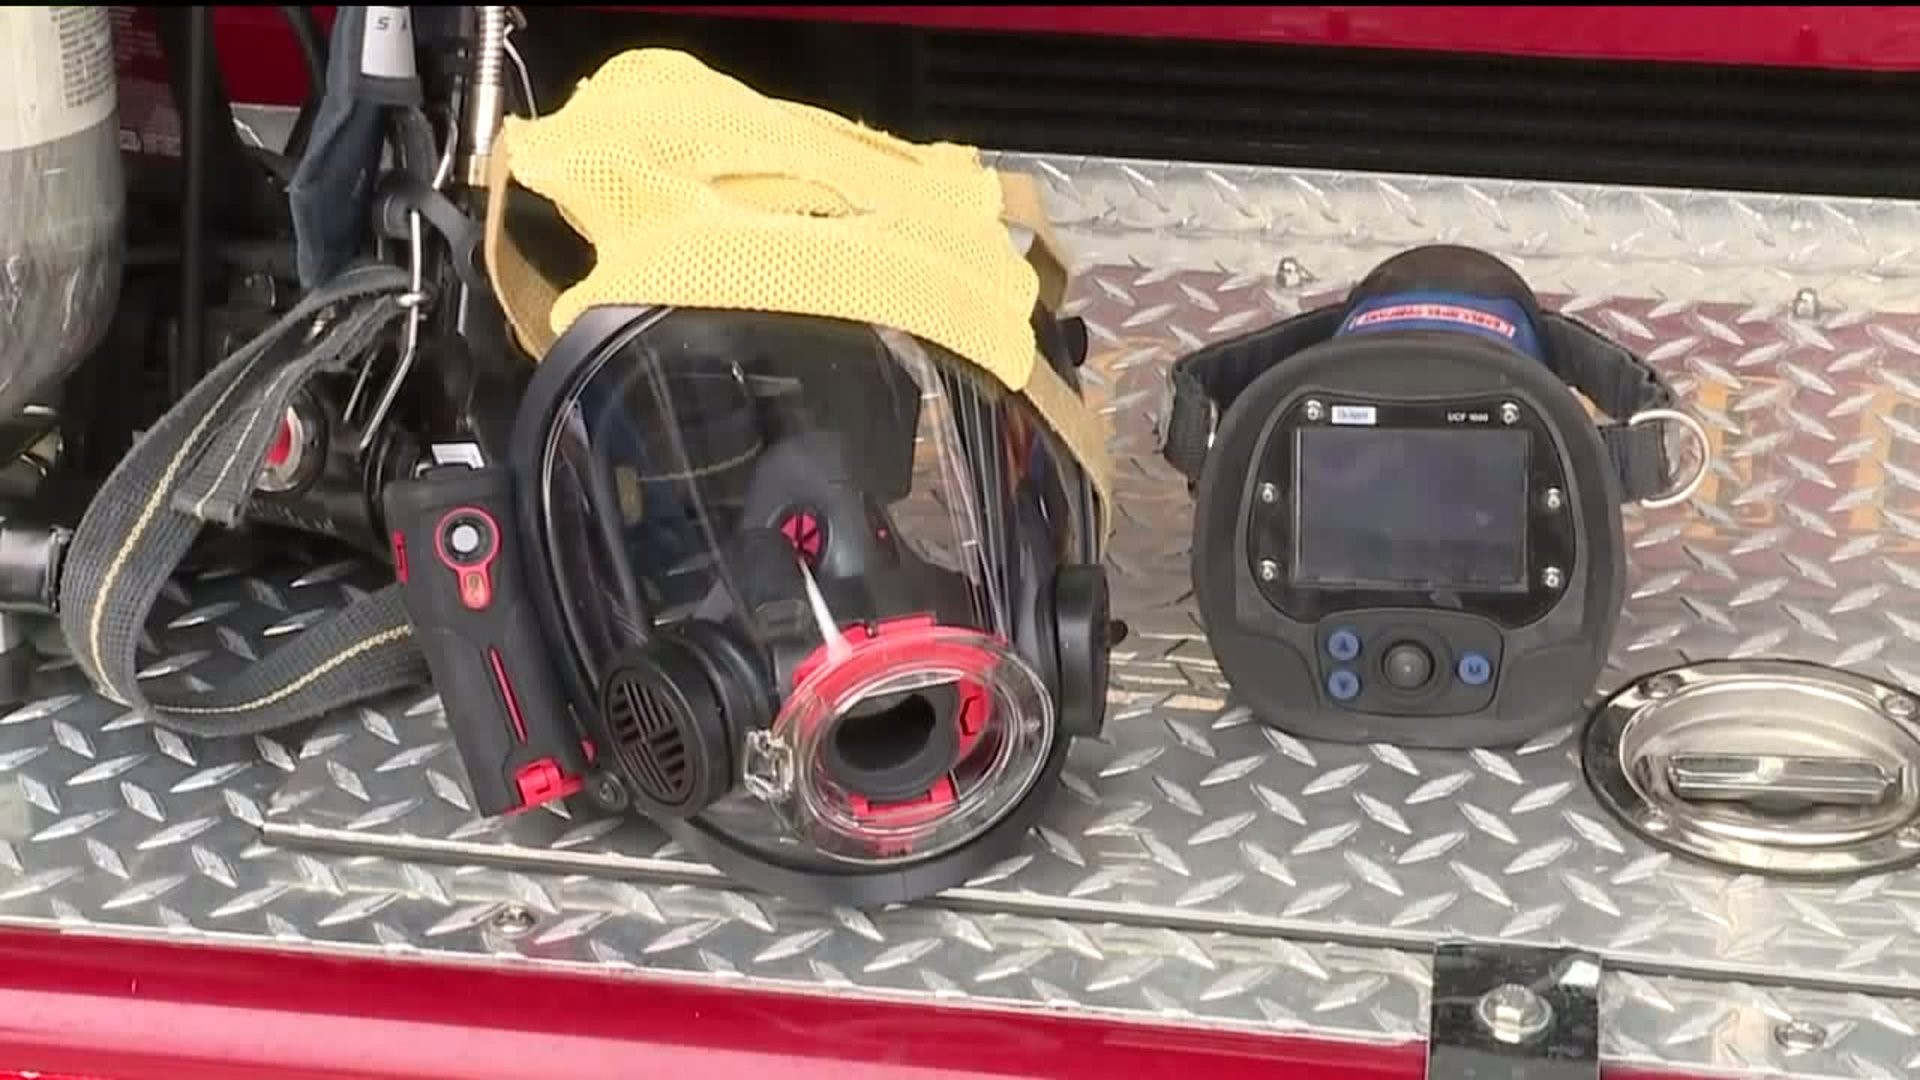 New Masks for Firefighters